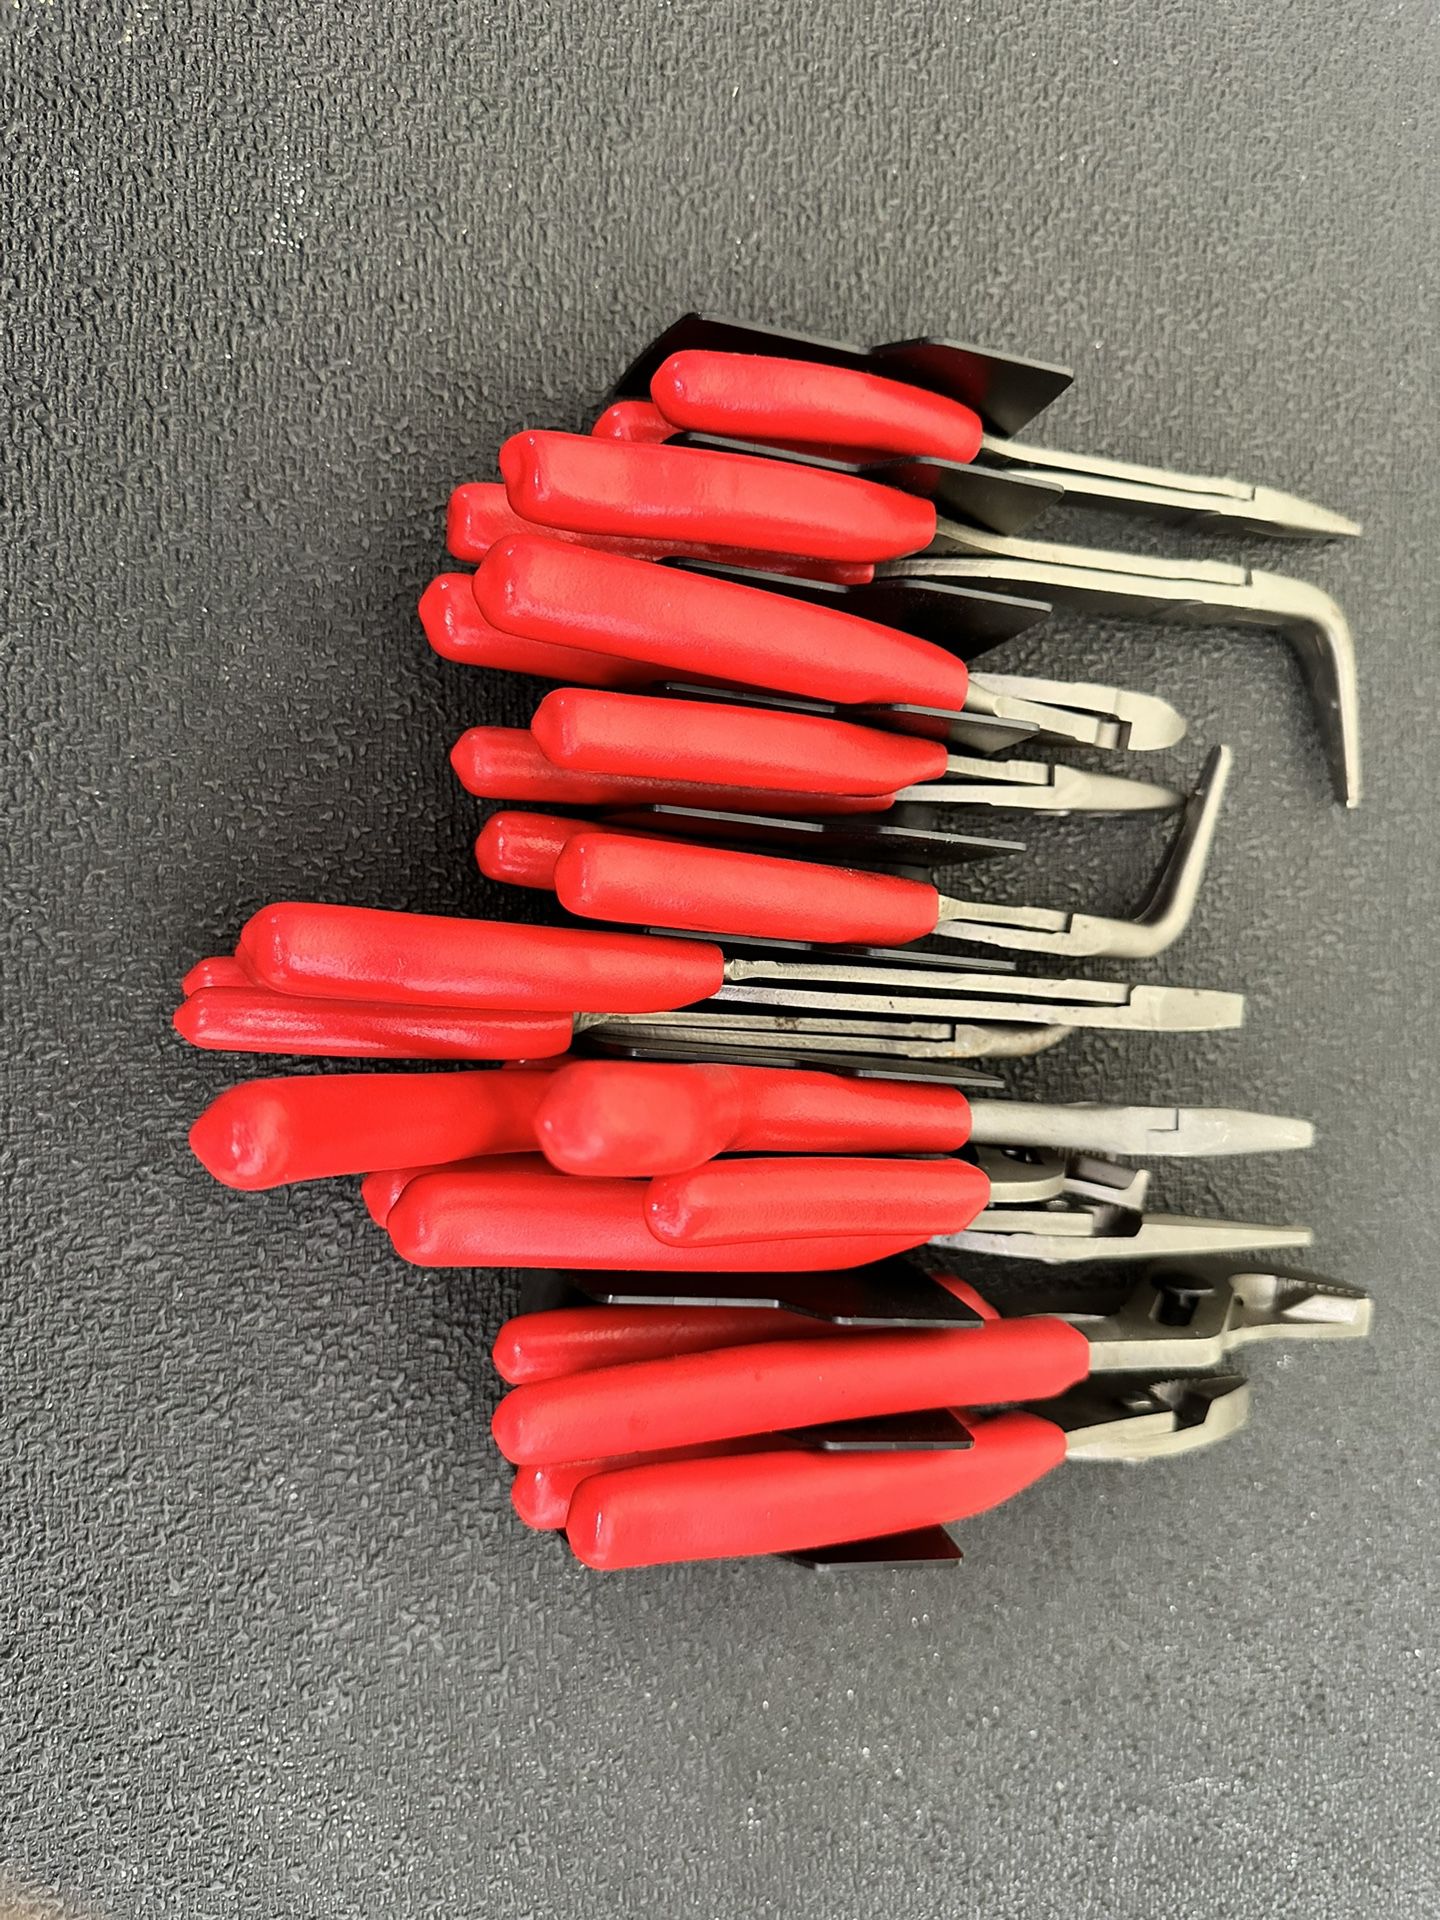 Snap-On Tool Holder DOES not come with tools